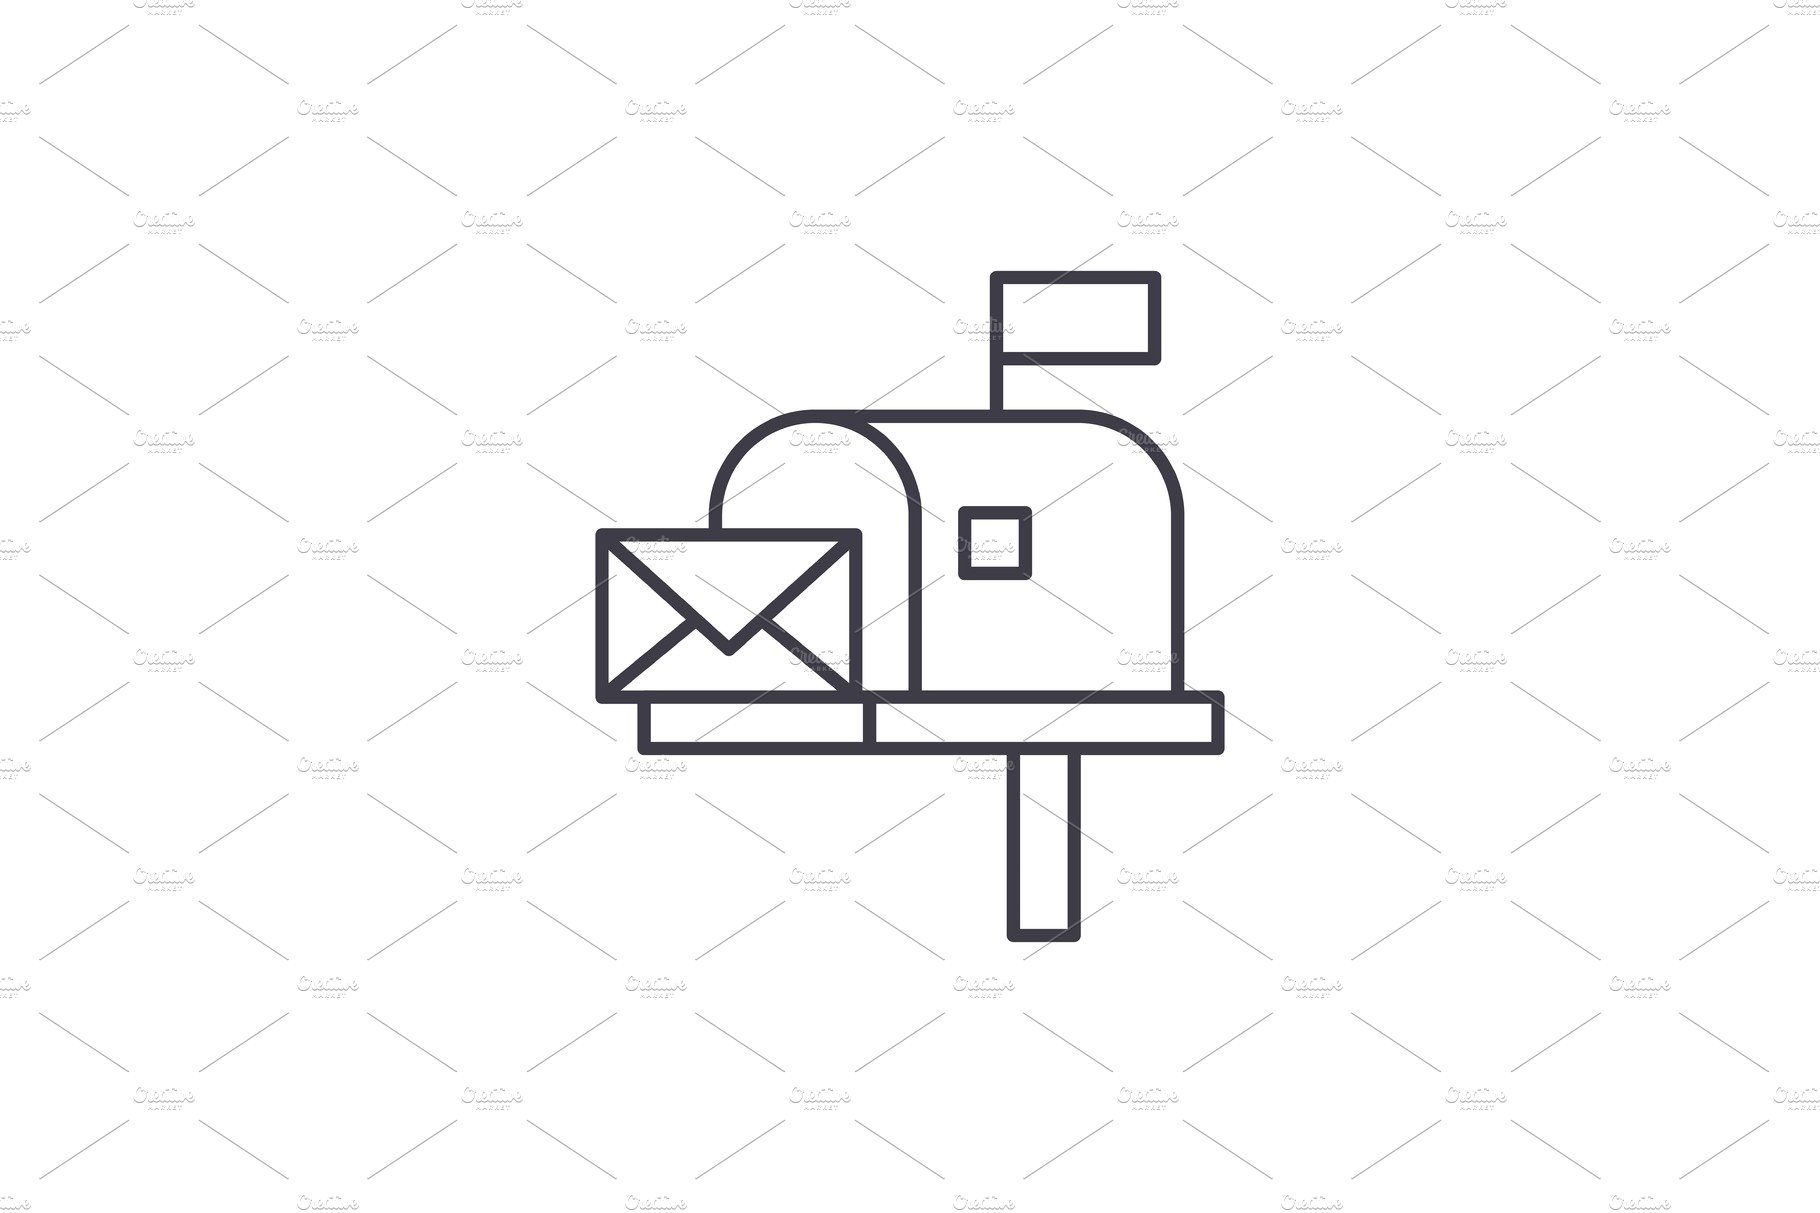 Mailbox line icon concept. Mailbox cover image.